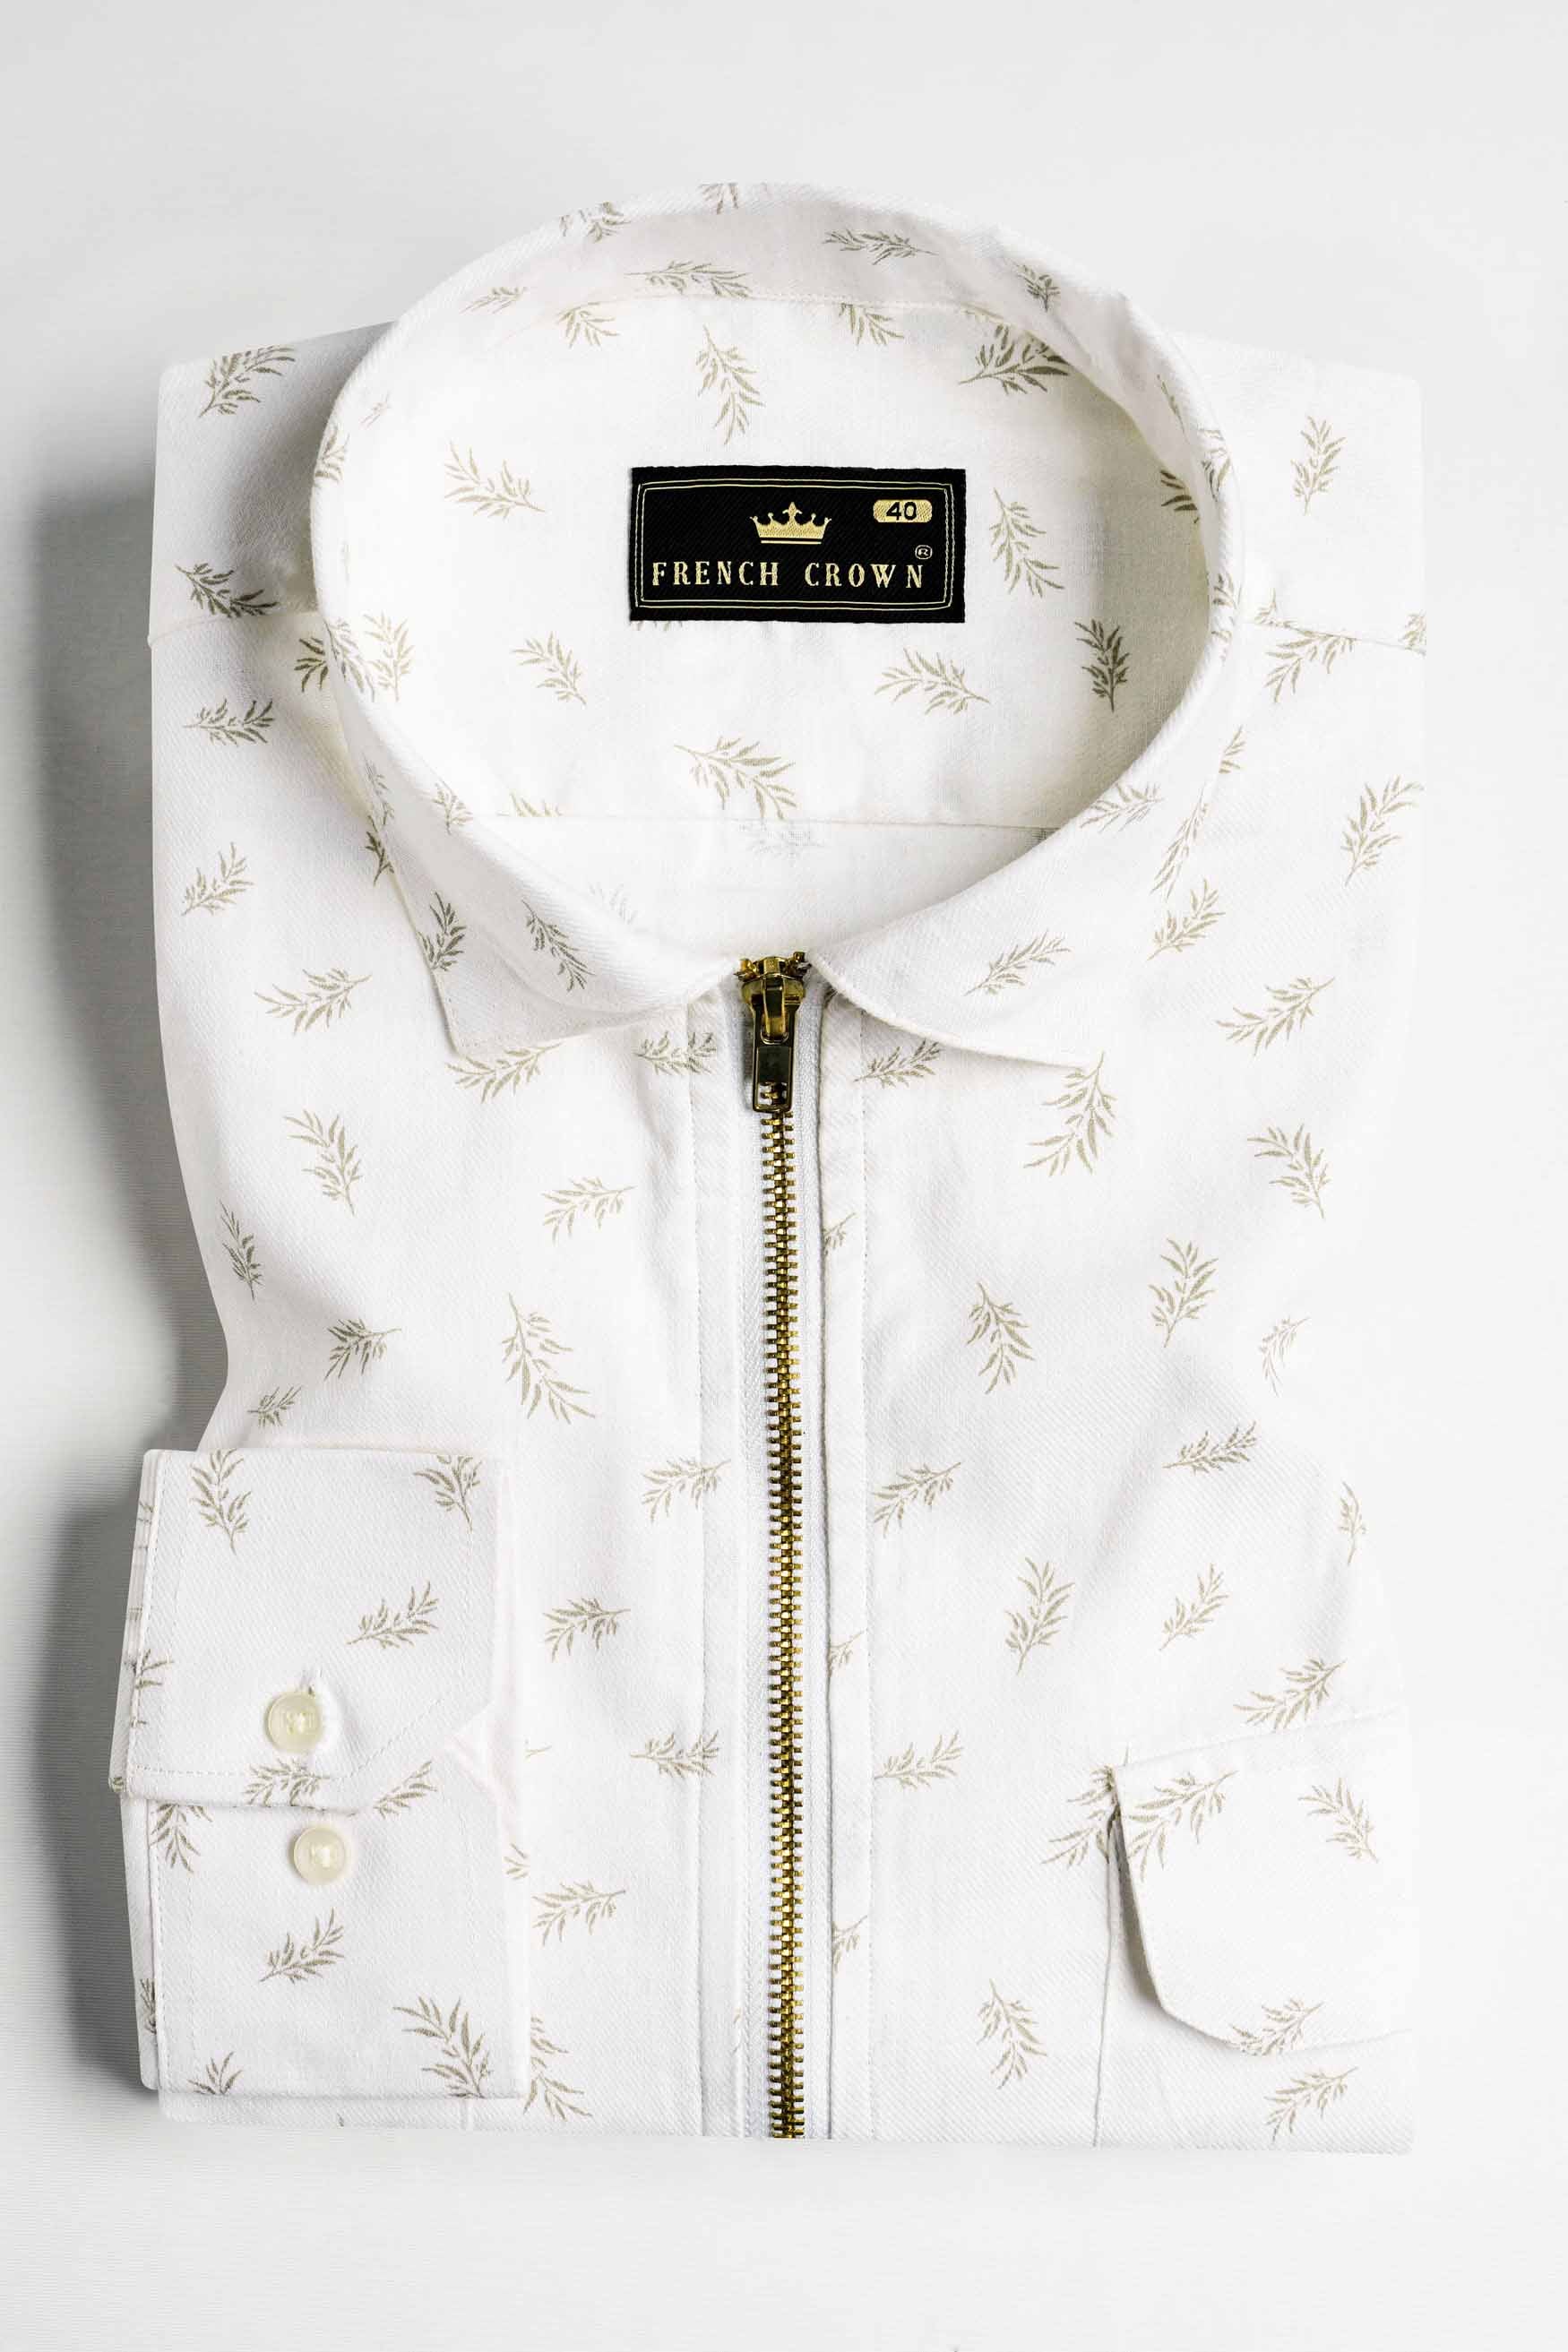 Bright White Leaves Printed Royal Oxford Designer Shirt with Zipper Closure